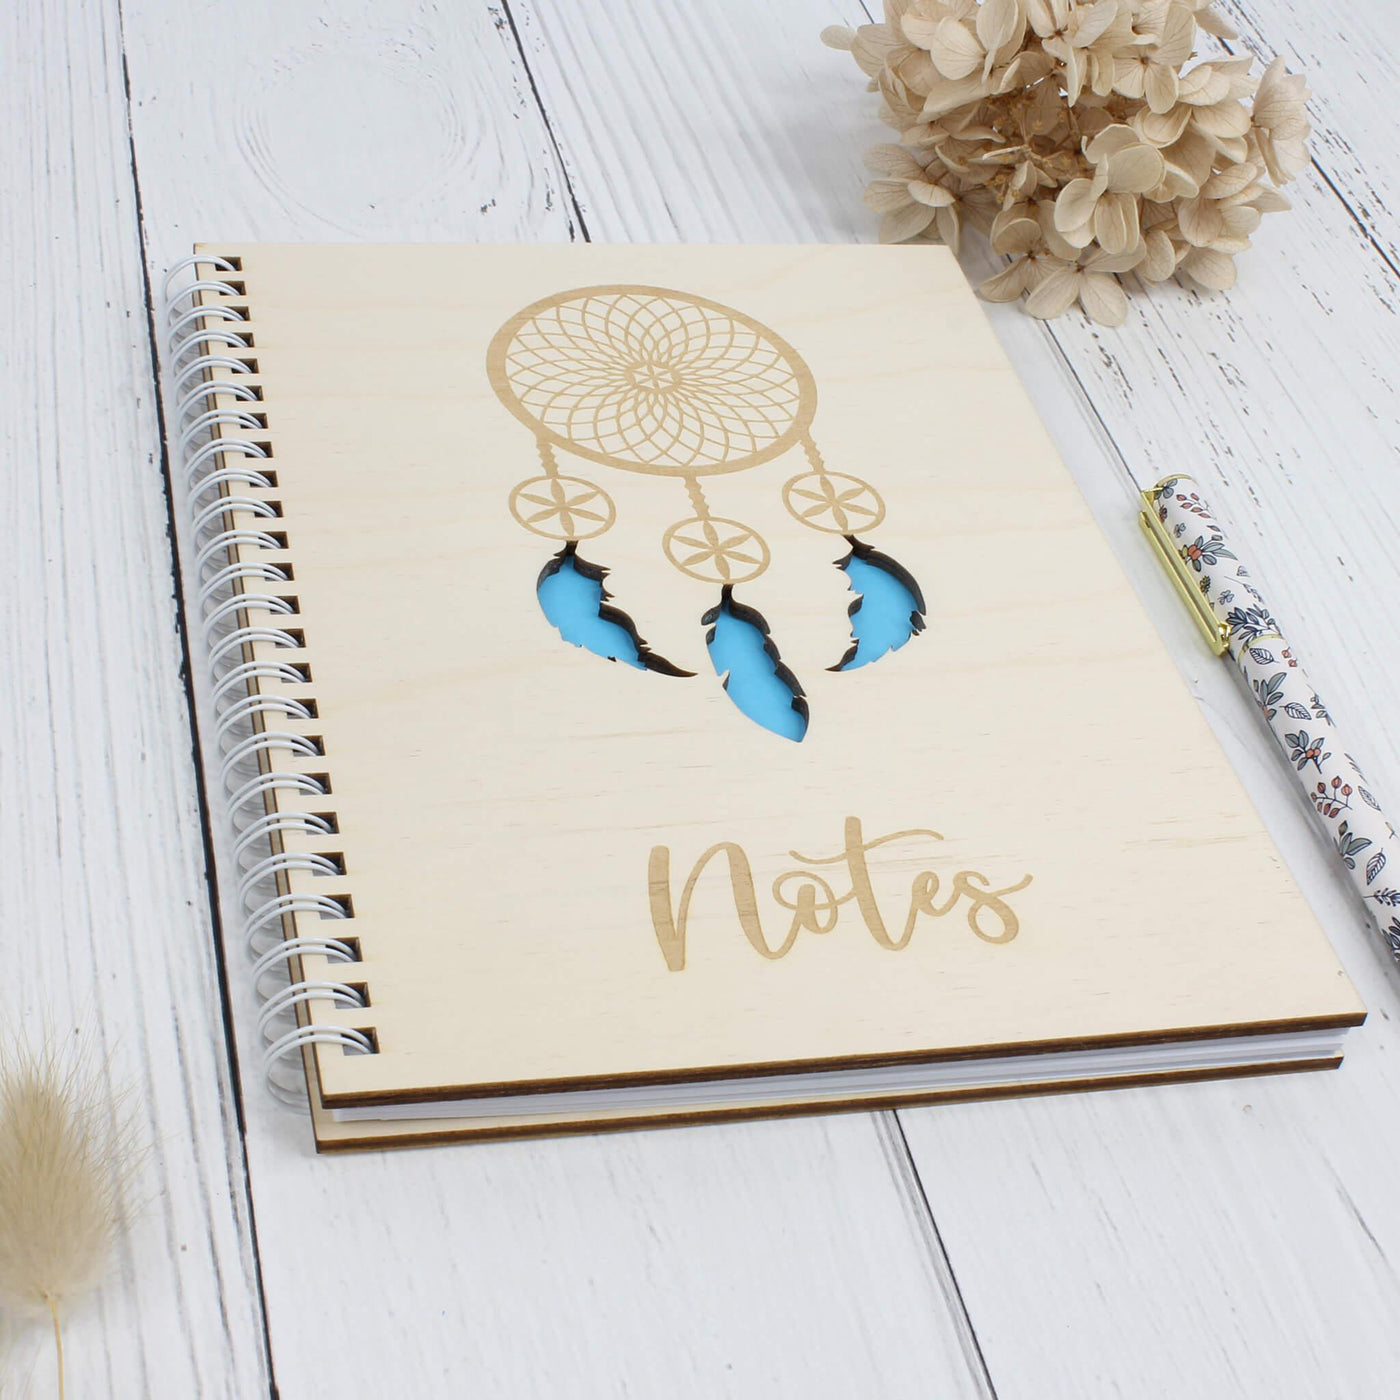 Personalised wooden notebook - dreamcatcher blue